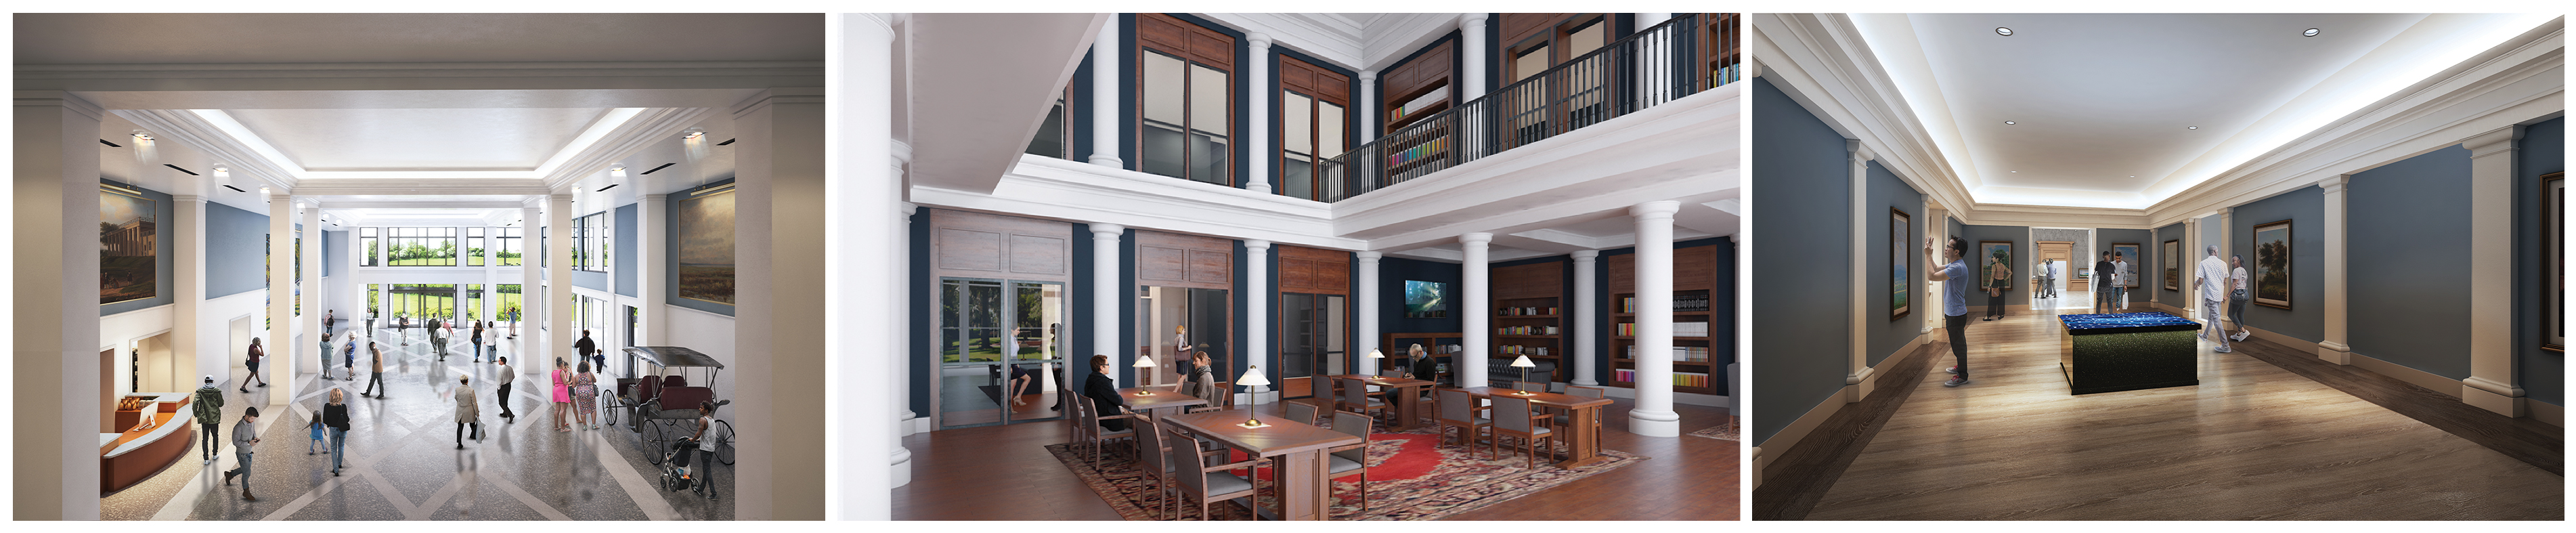 Renderings of the new Great Hall, Research Library, and Welcome Gallery